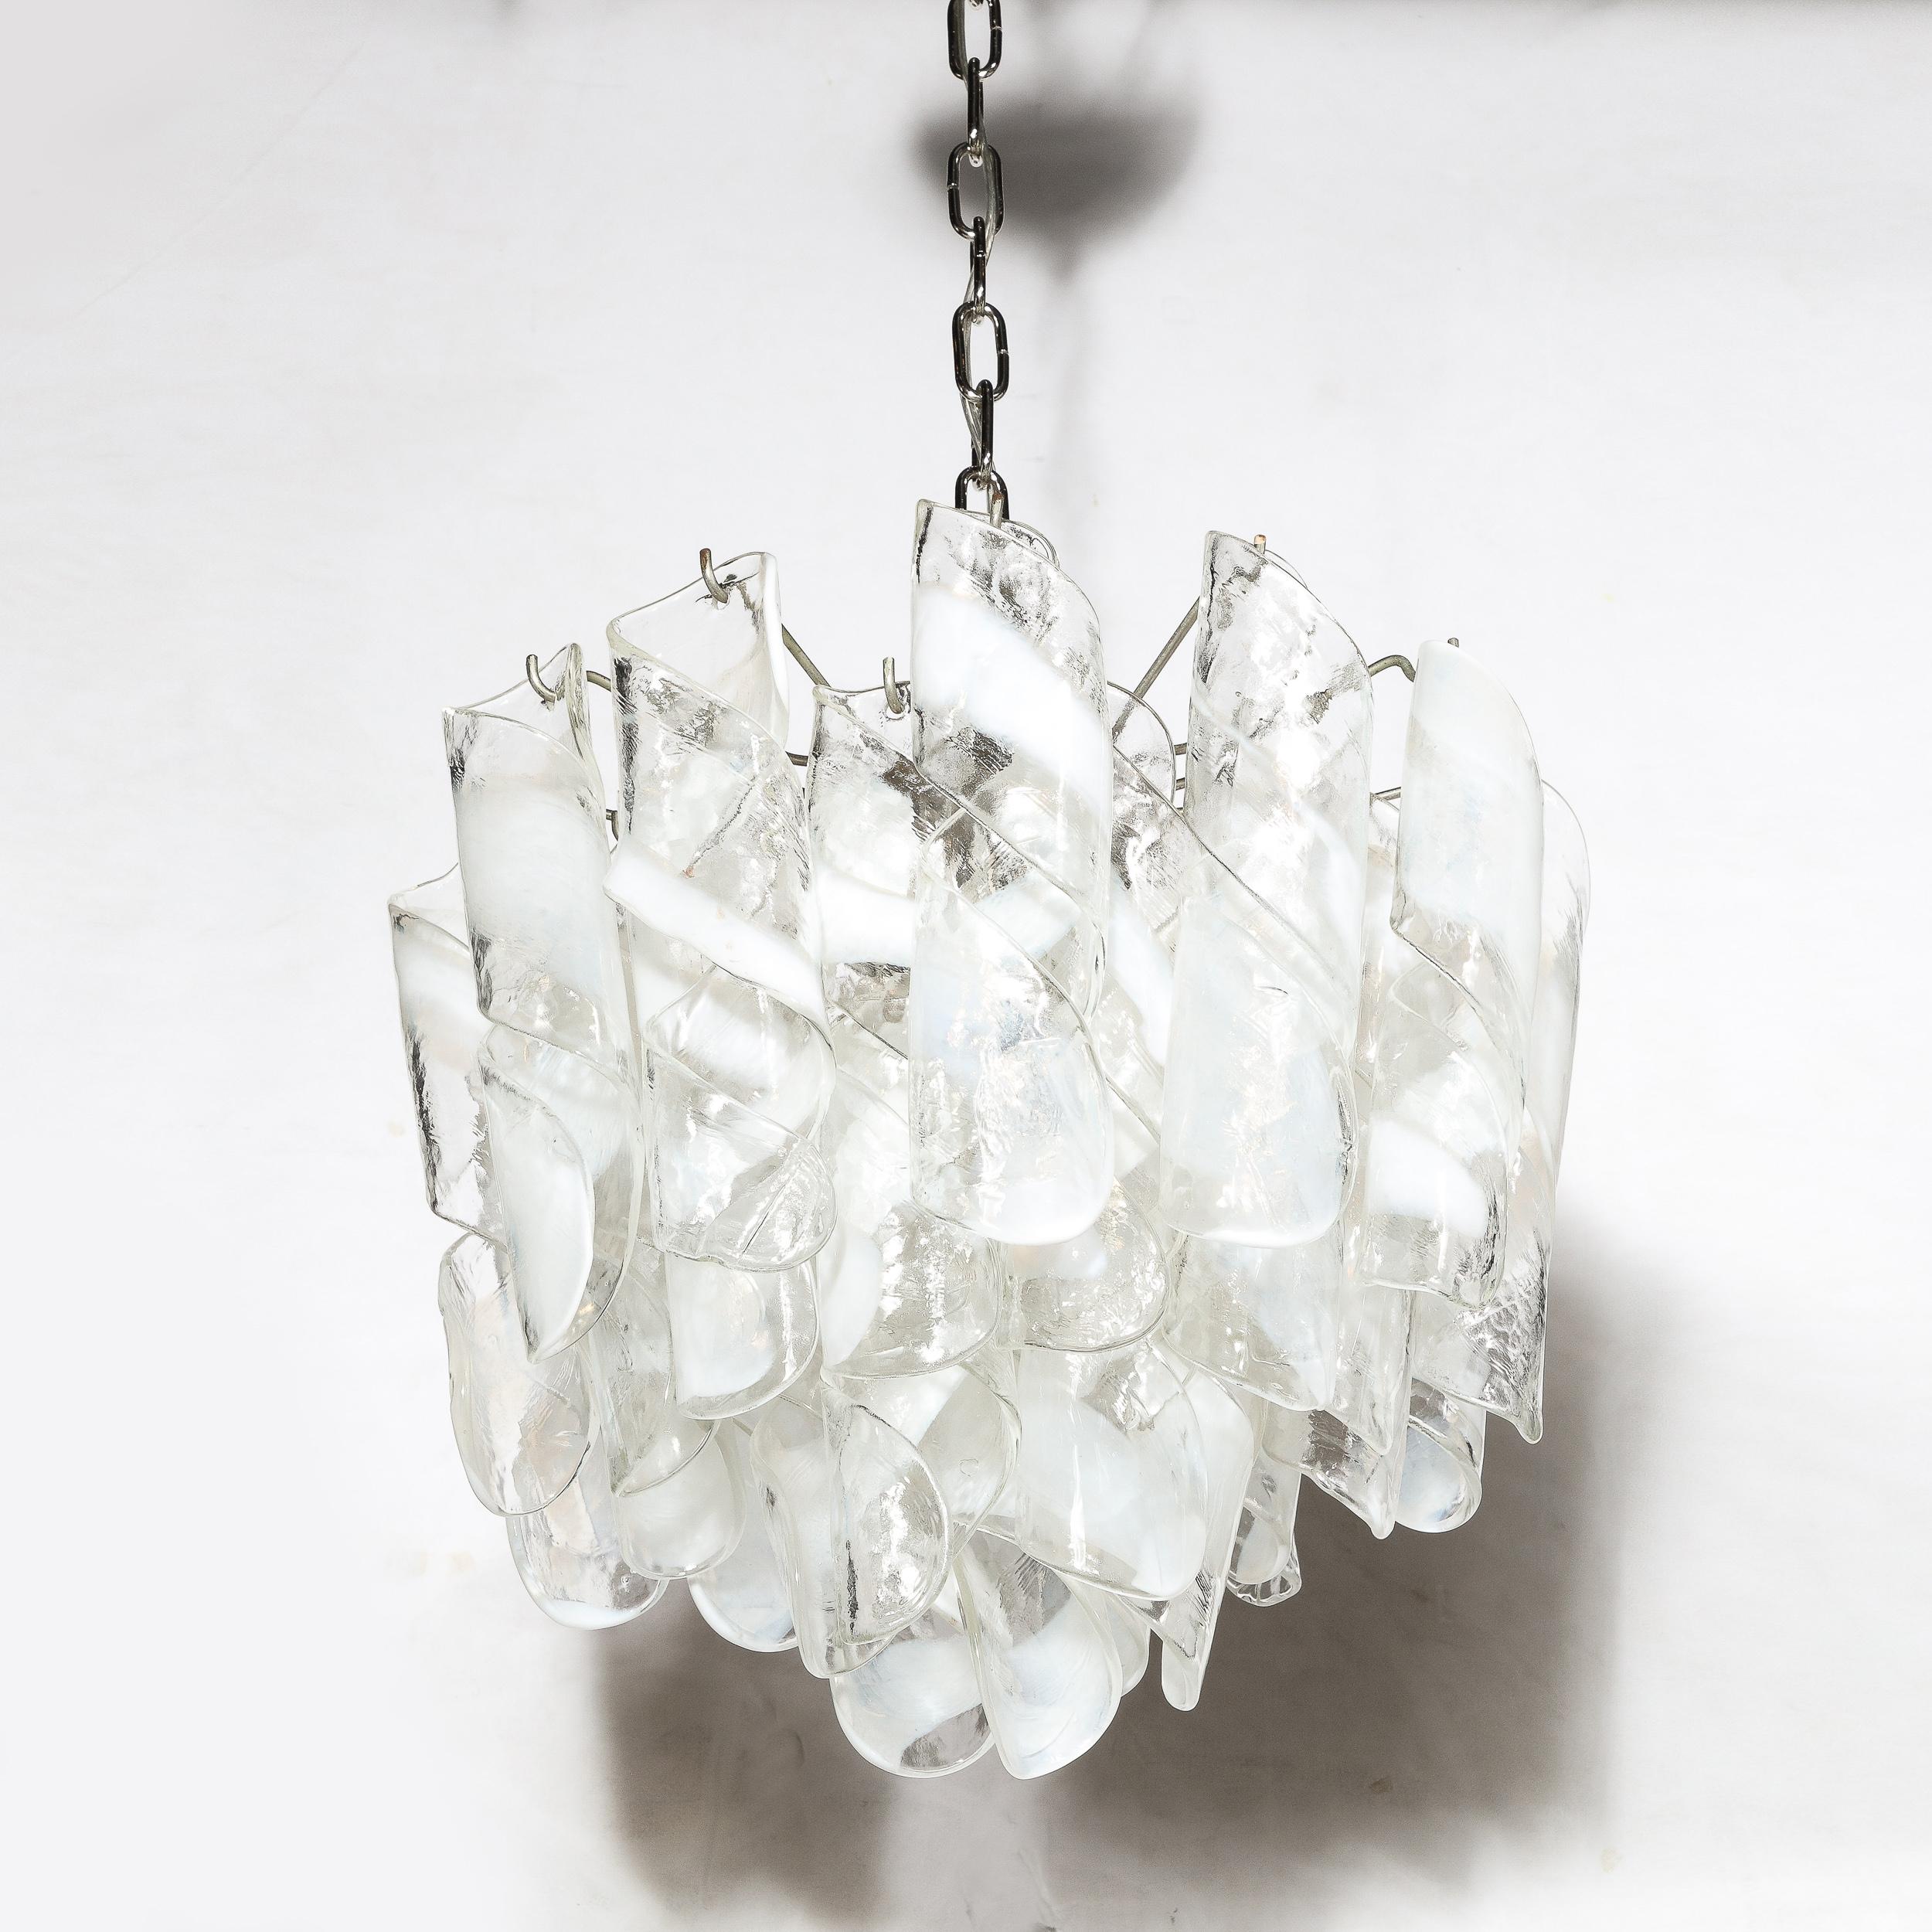 Mid-Century Modernist Hand-Blown Murano Glass Torciglioni Chandelier By Mazzega In Excellent Condition For Sale In New York, NY